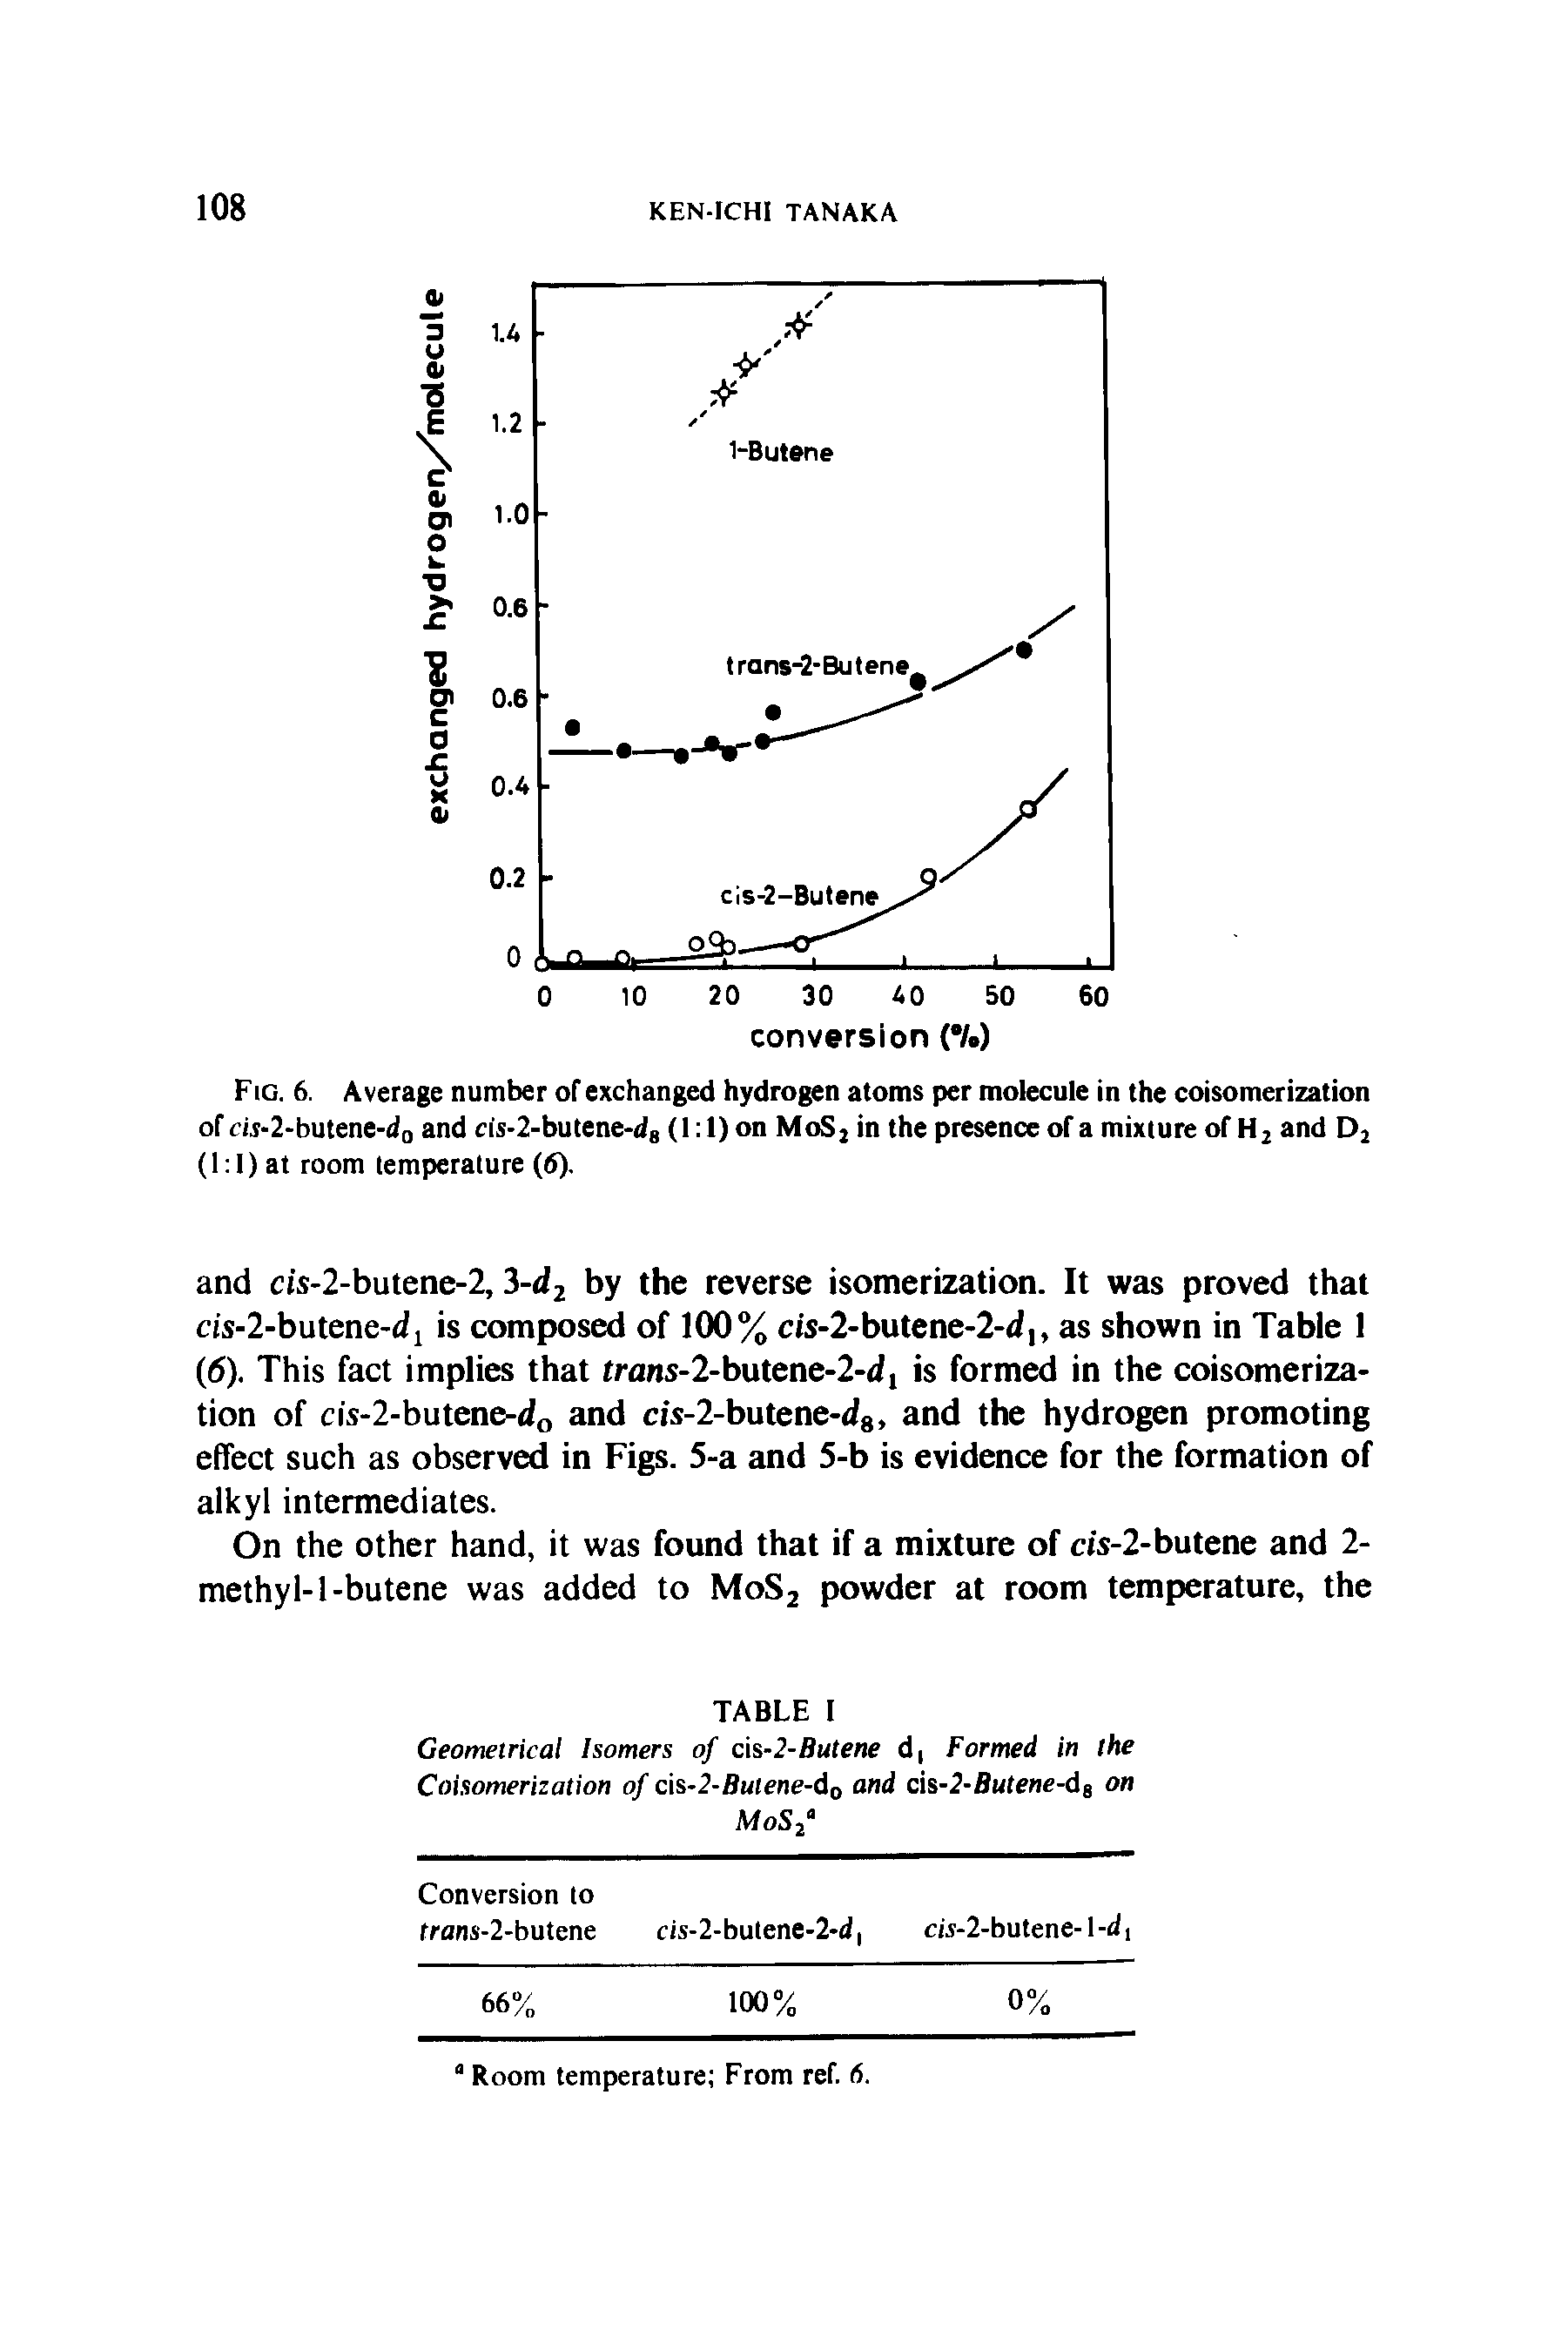 Fig. 6. Average number of exchanged hydrogen atoms per molecule in the coisomerization ol ra-2-butene-d0 and n s-2-butene-ds (1 1) on MoS2 in the presence of a mixture of H2 and D2 (1 1) at room temperature (6).